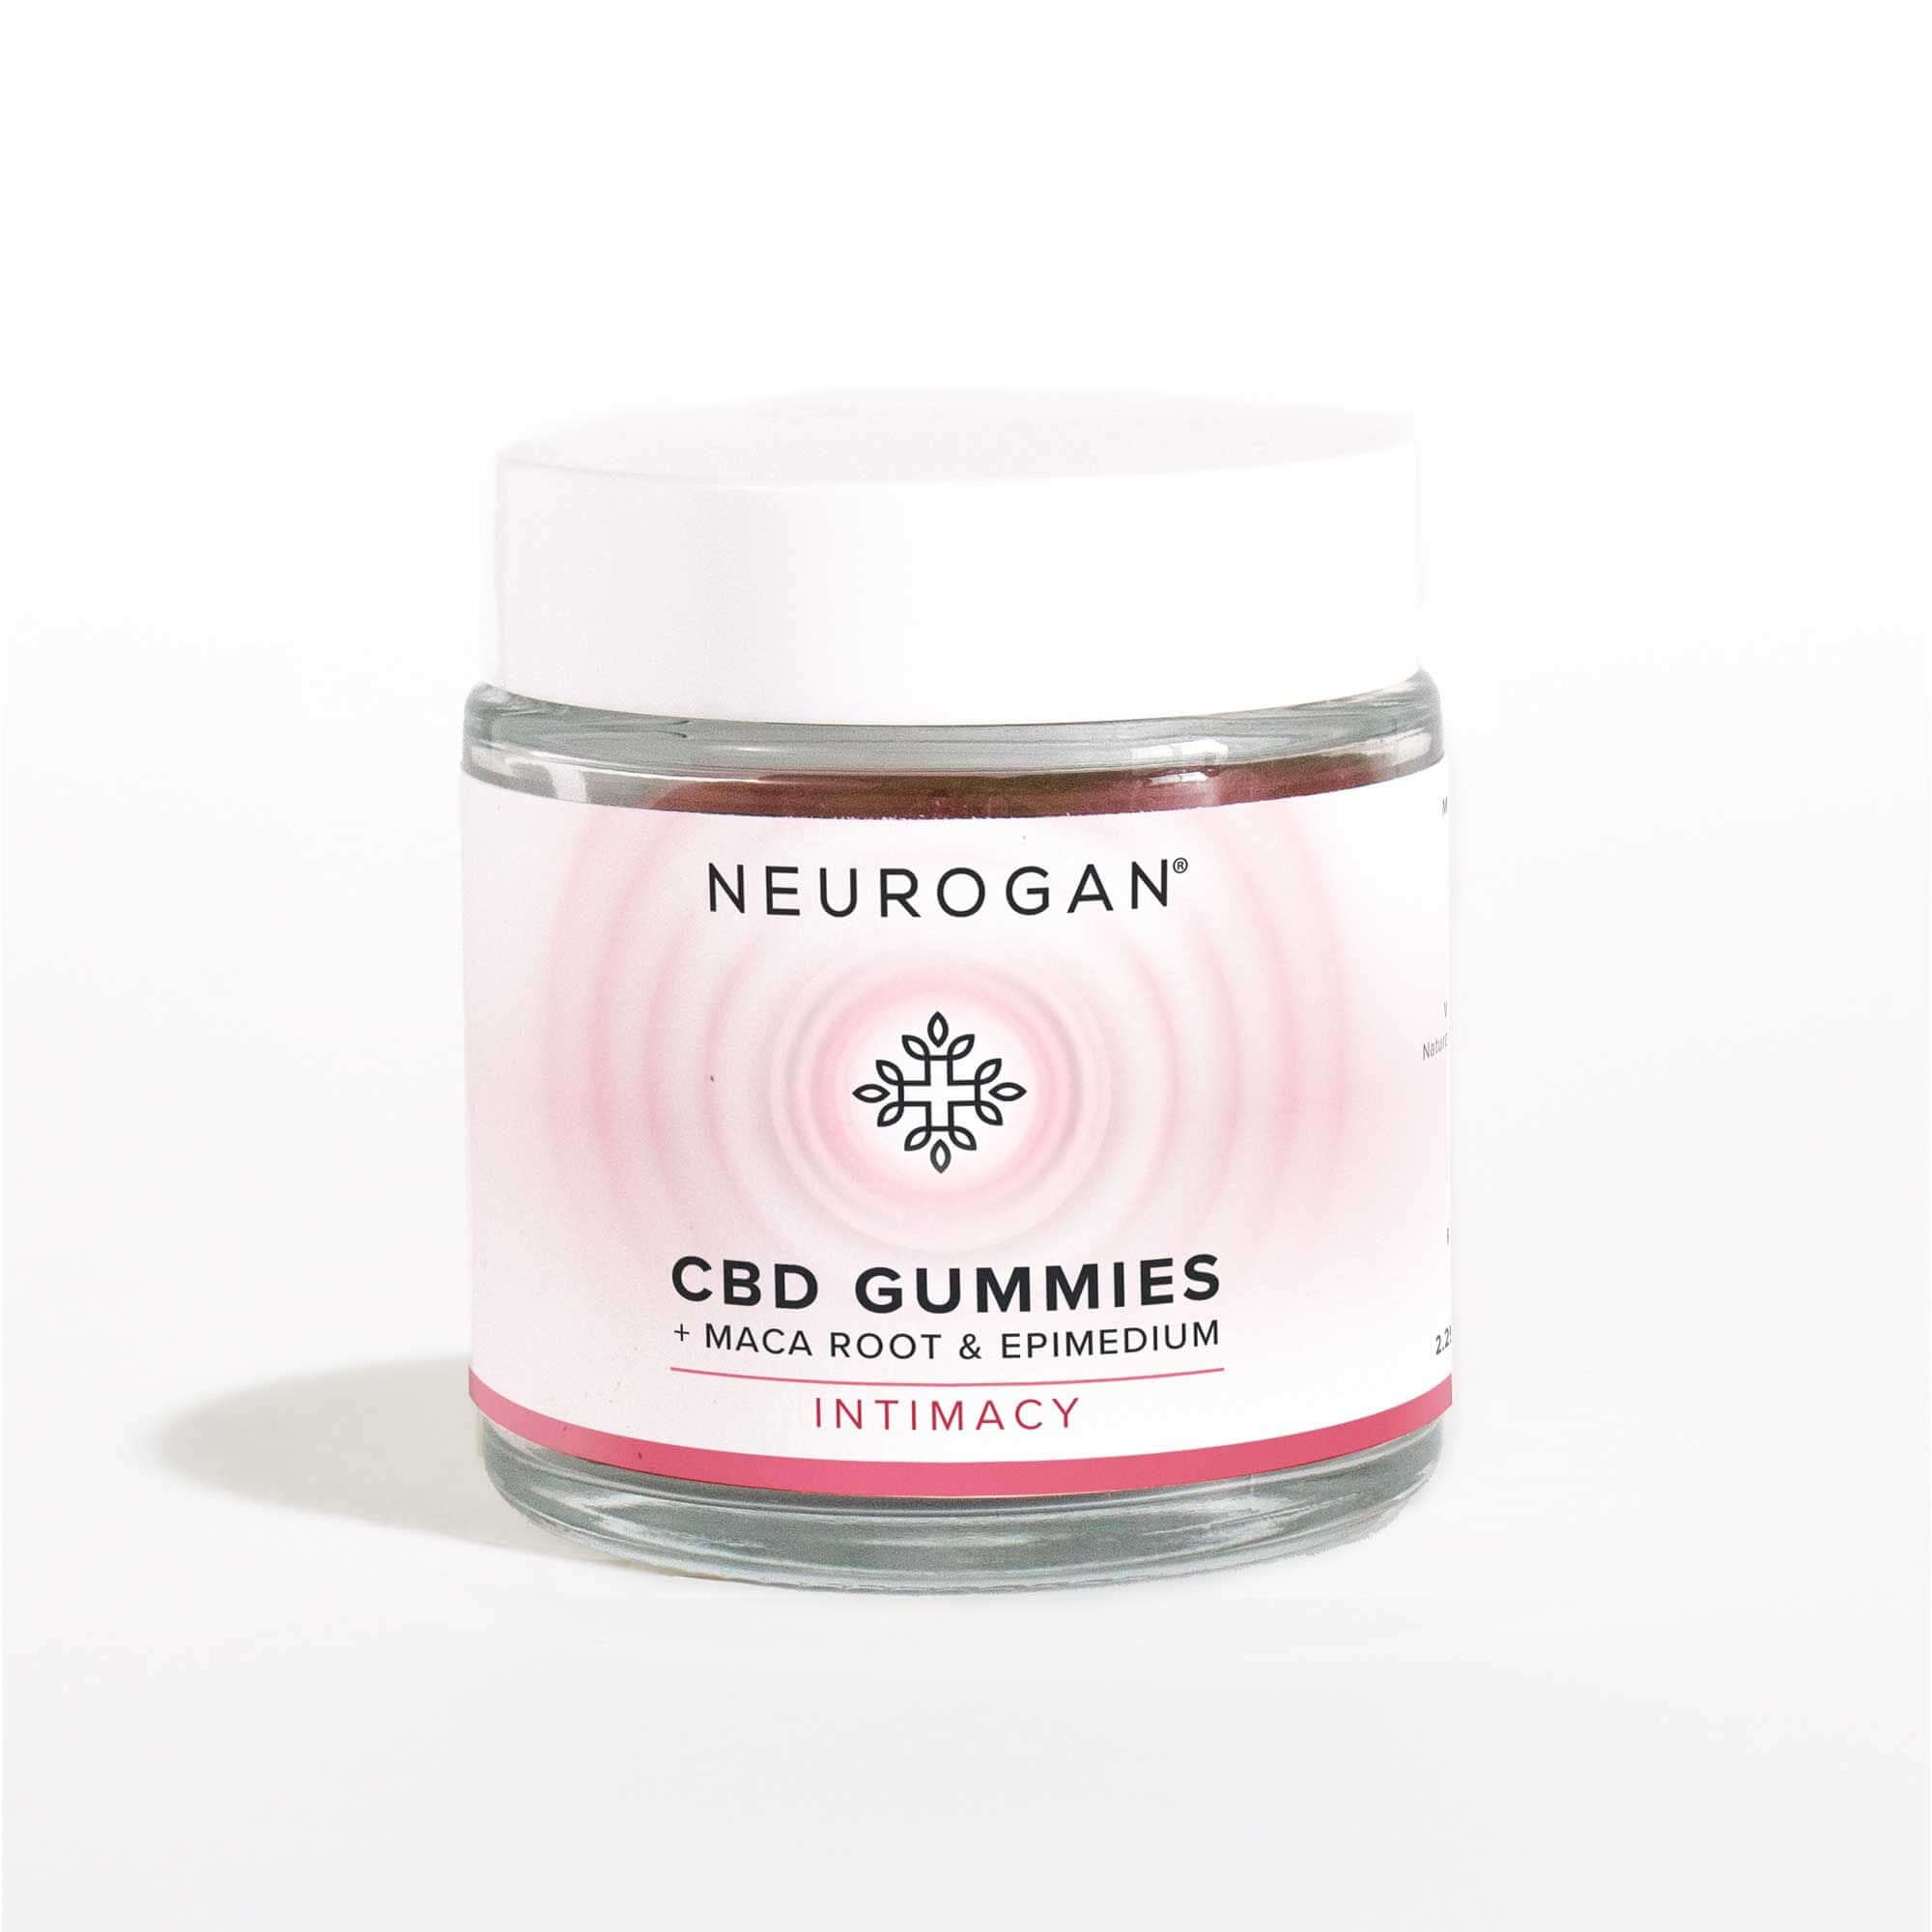 A jar pack of CBD Gummies for sex, transparent packaging with pink label and white top lid